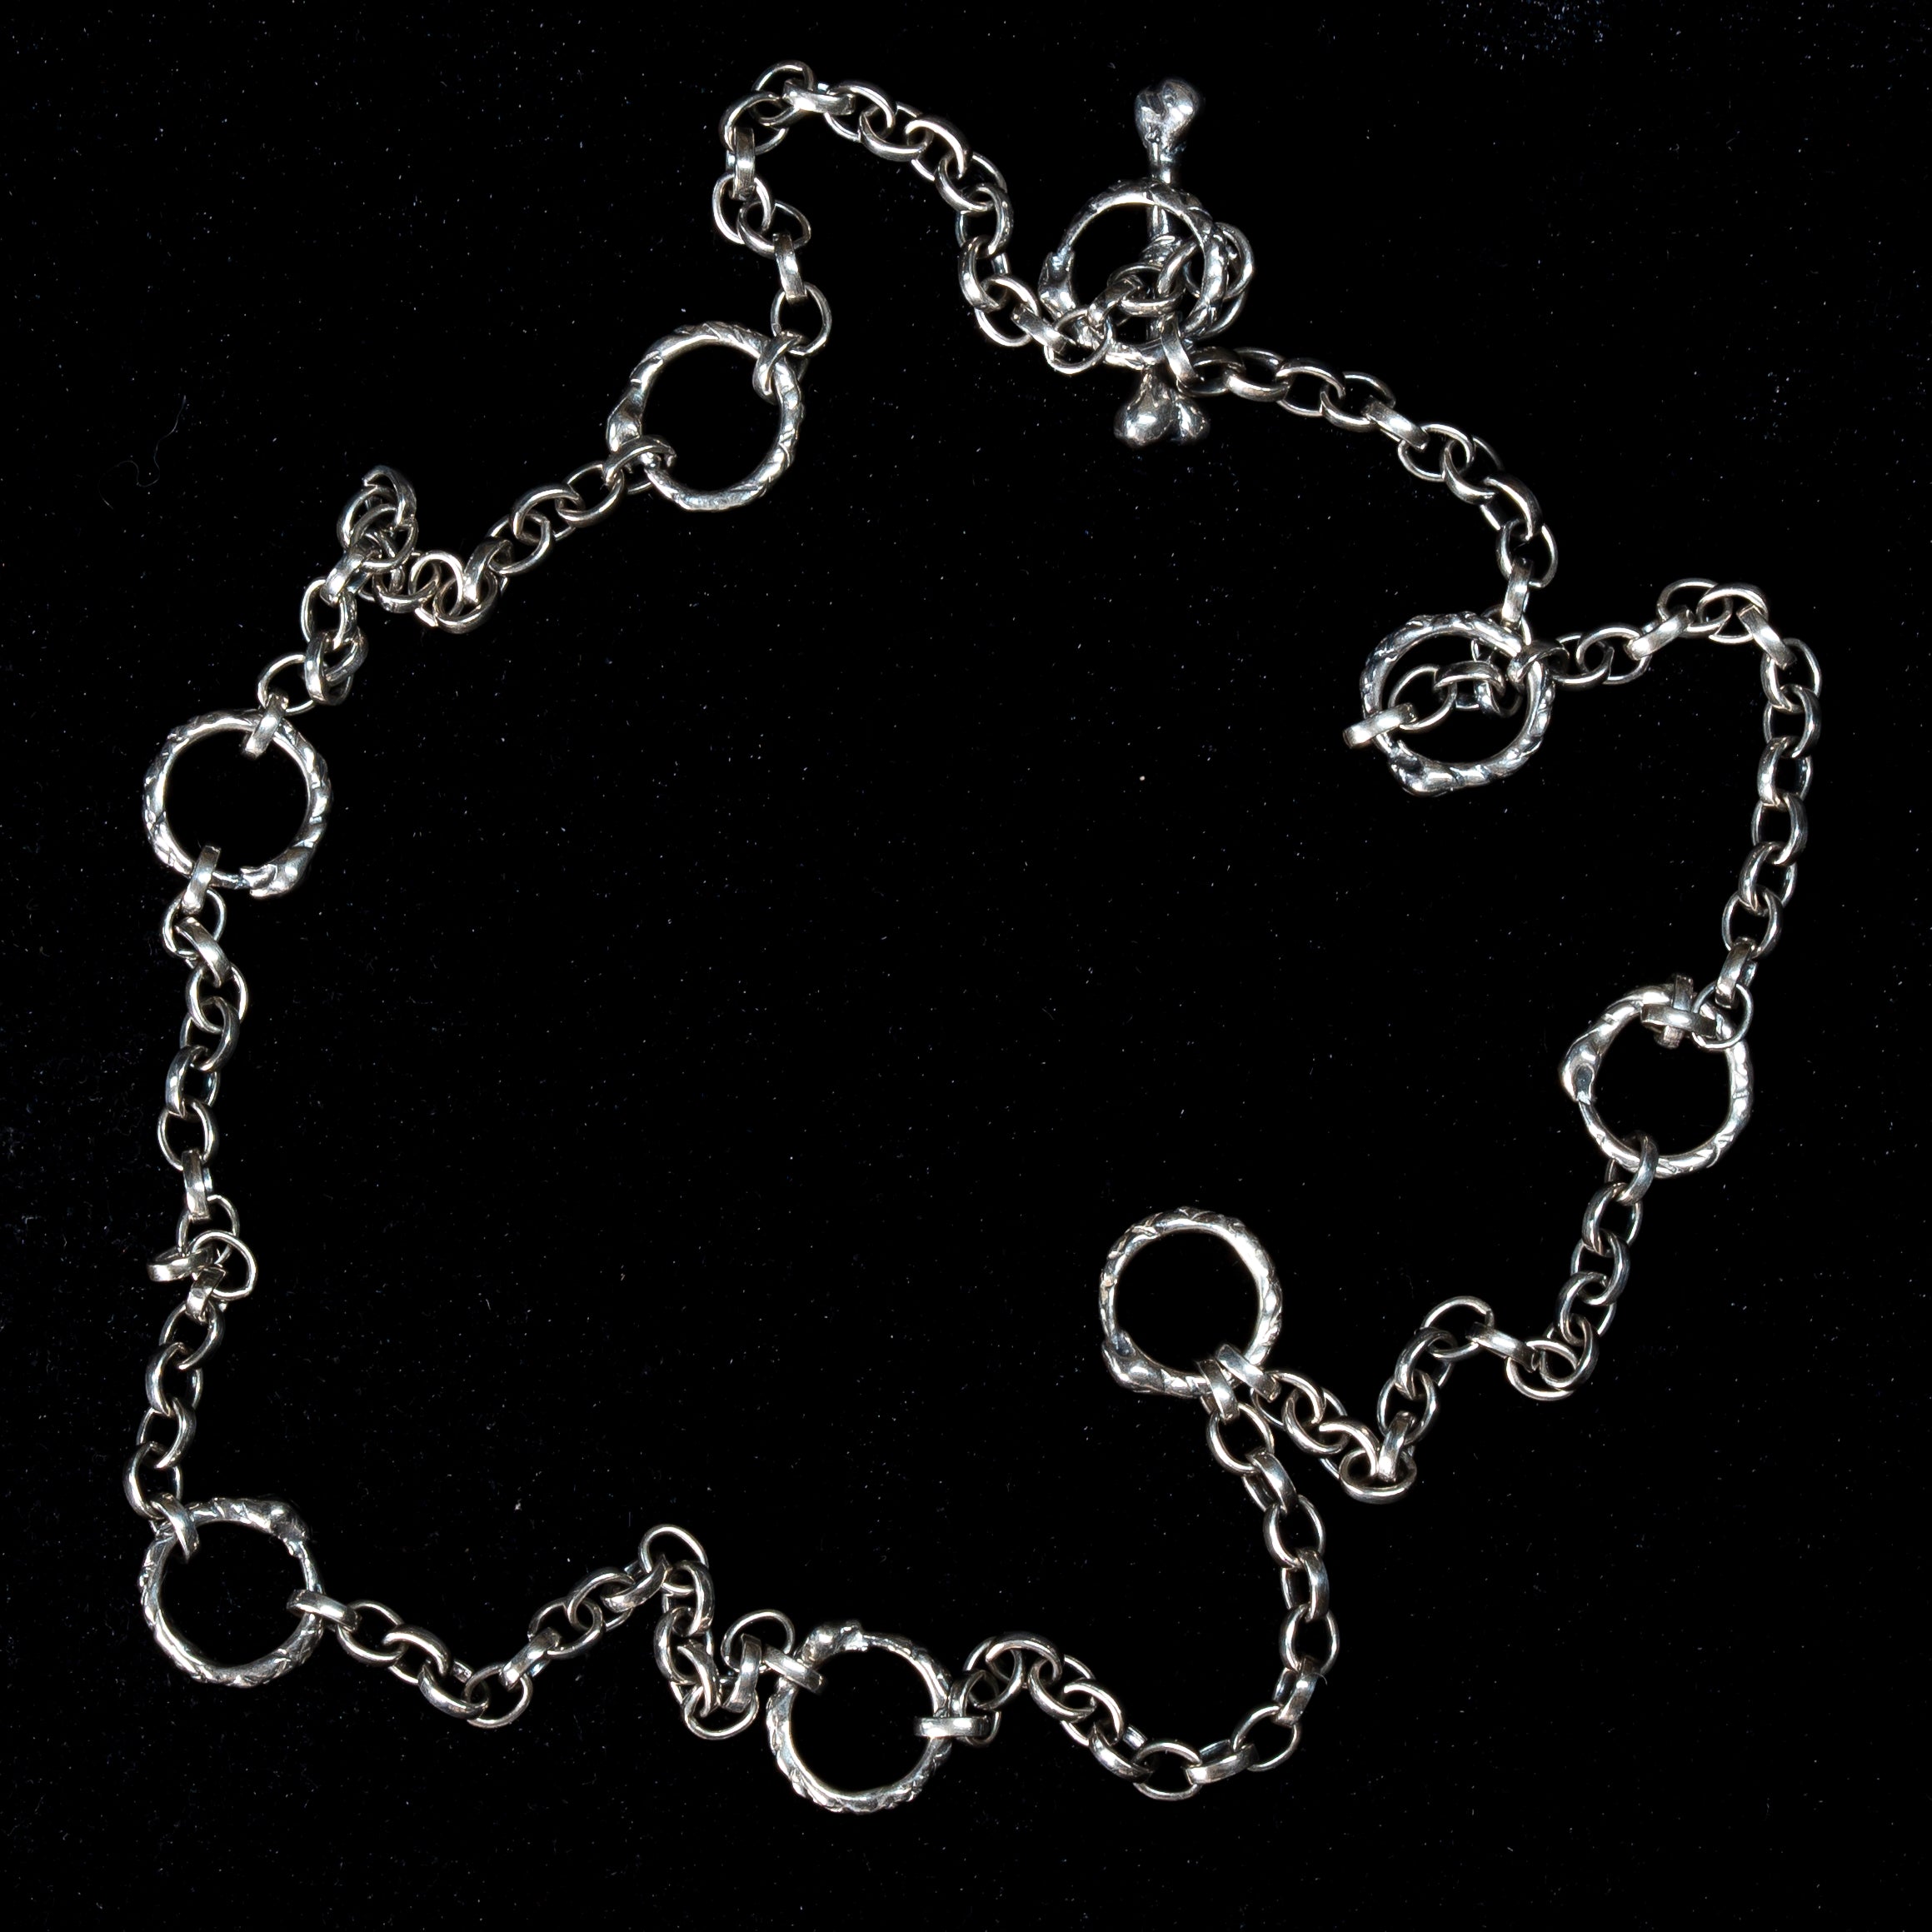 Snakes Charm Chain